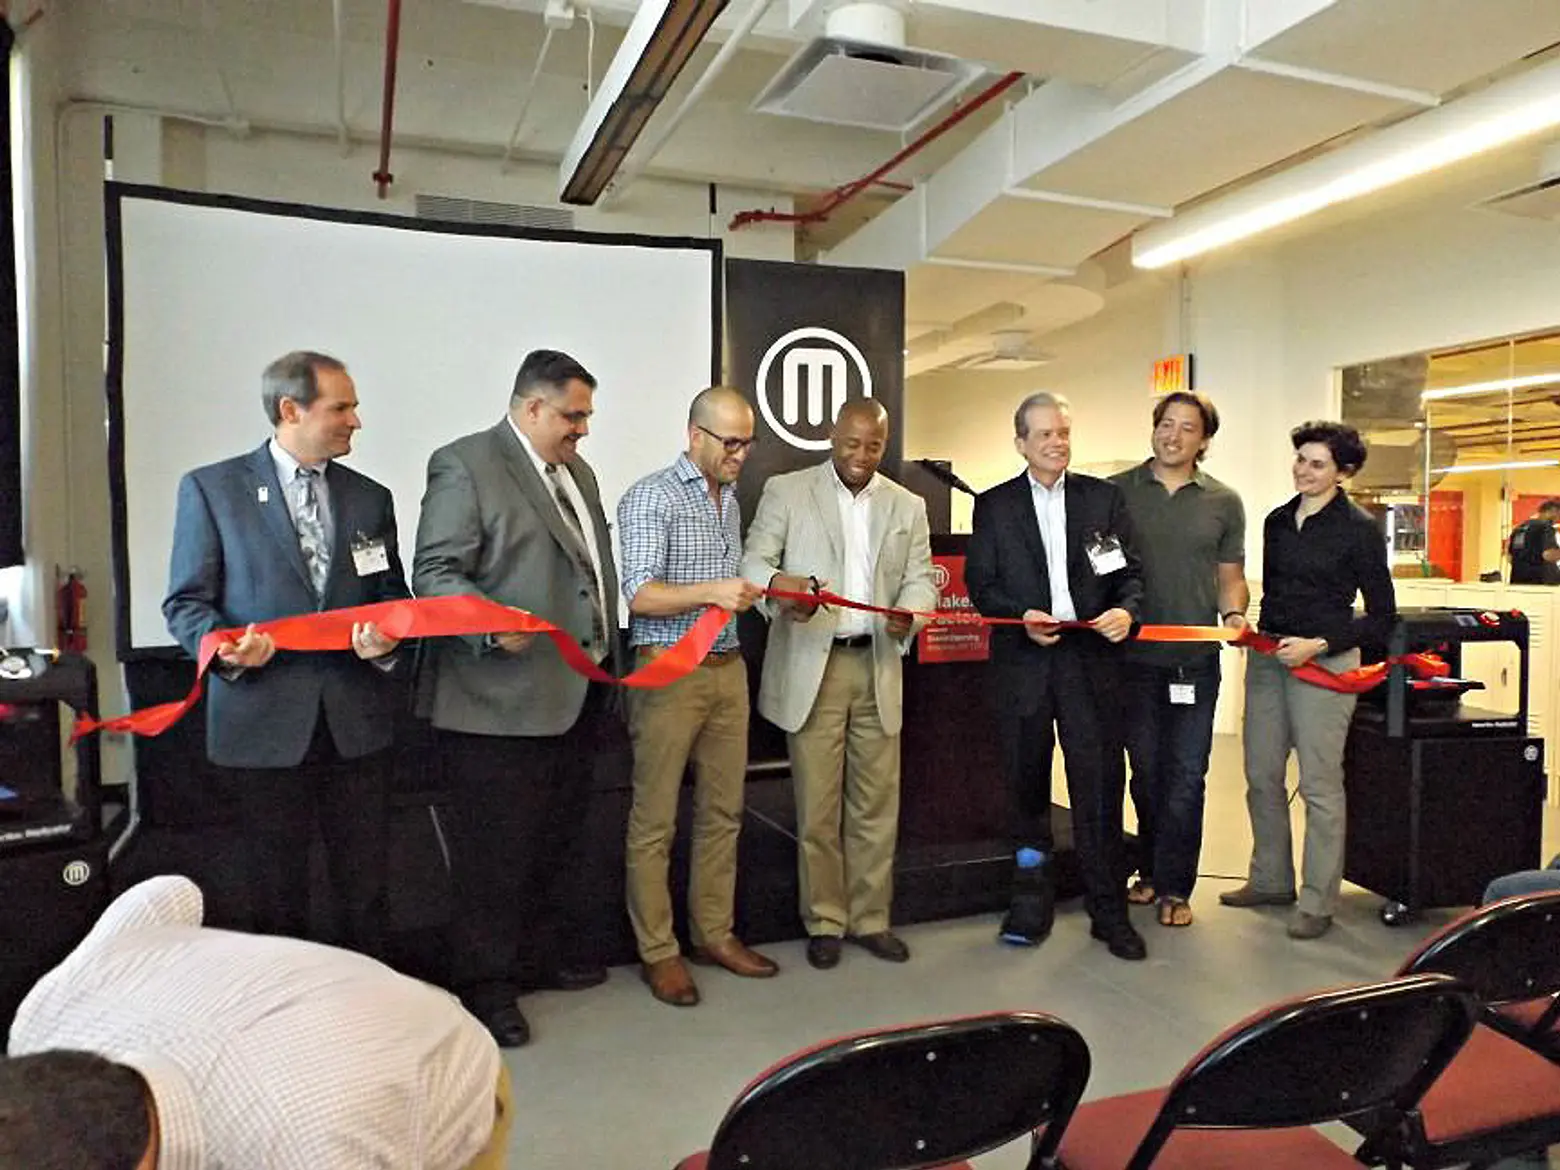 MakerBot, MakerBot Factory Grand Opening, Ribbon Cutting, Industry City, Made in Brooklyn, 3D Printing